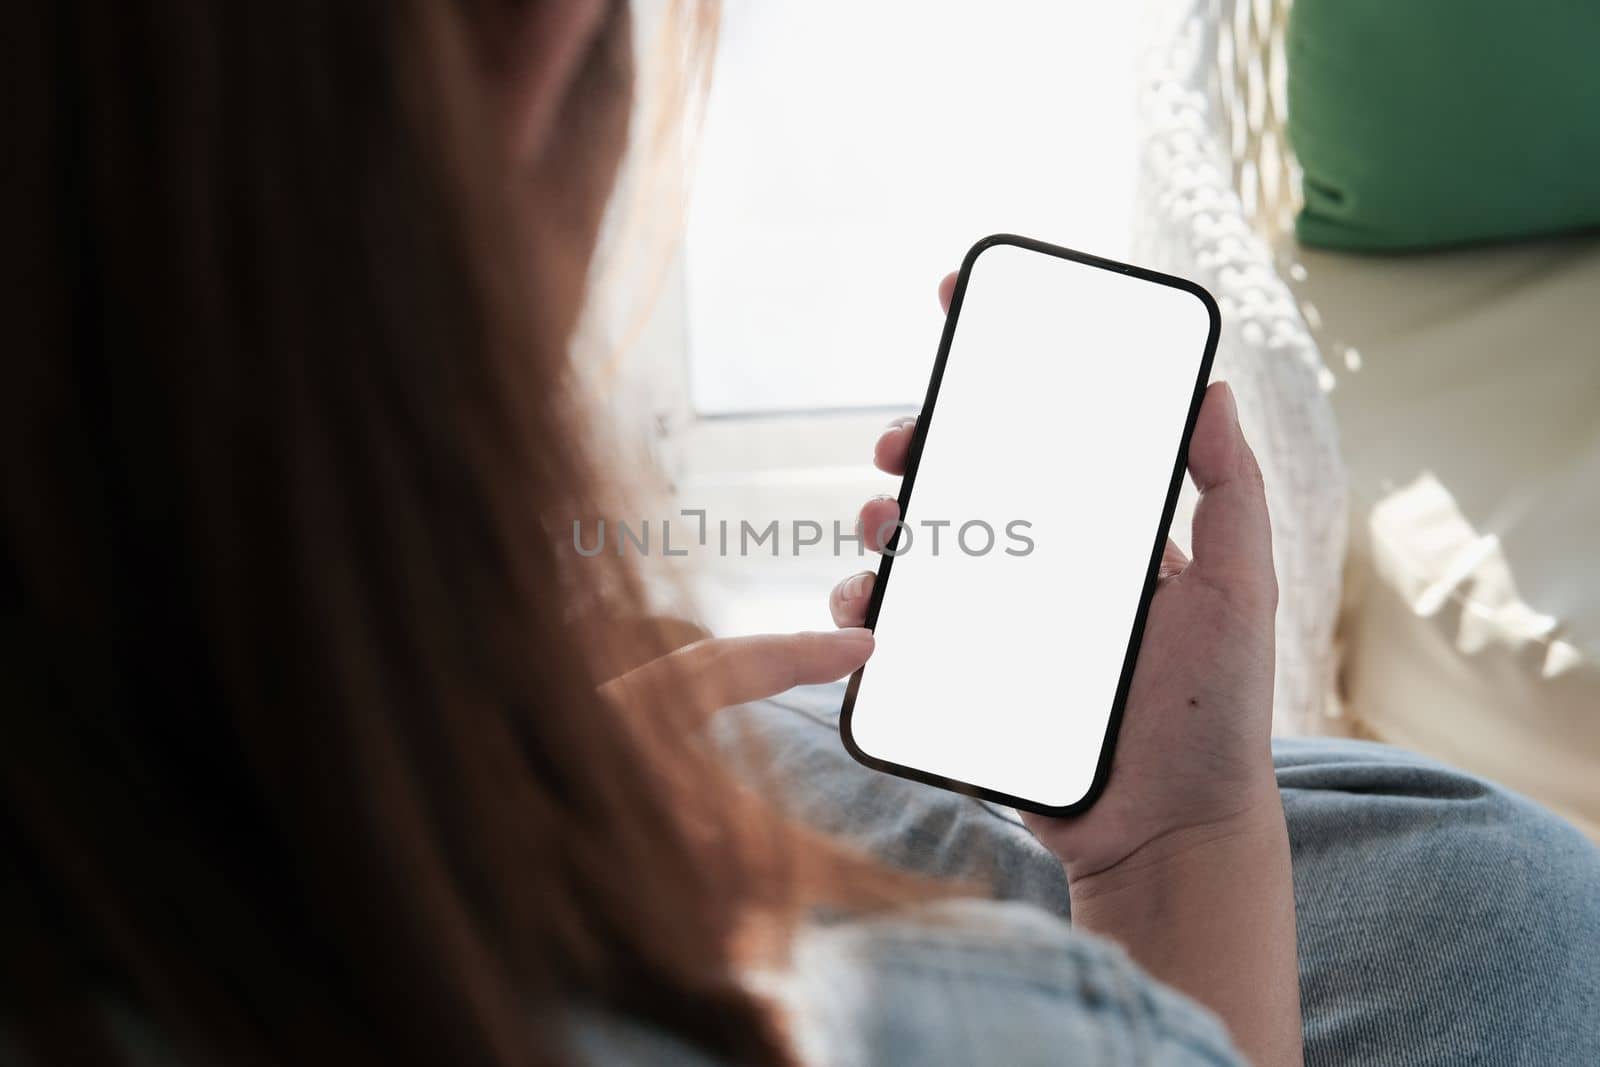 Mock up phone in woman hand showing white screen. Mobile phone white screen is blank the background is blurred.